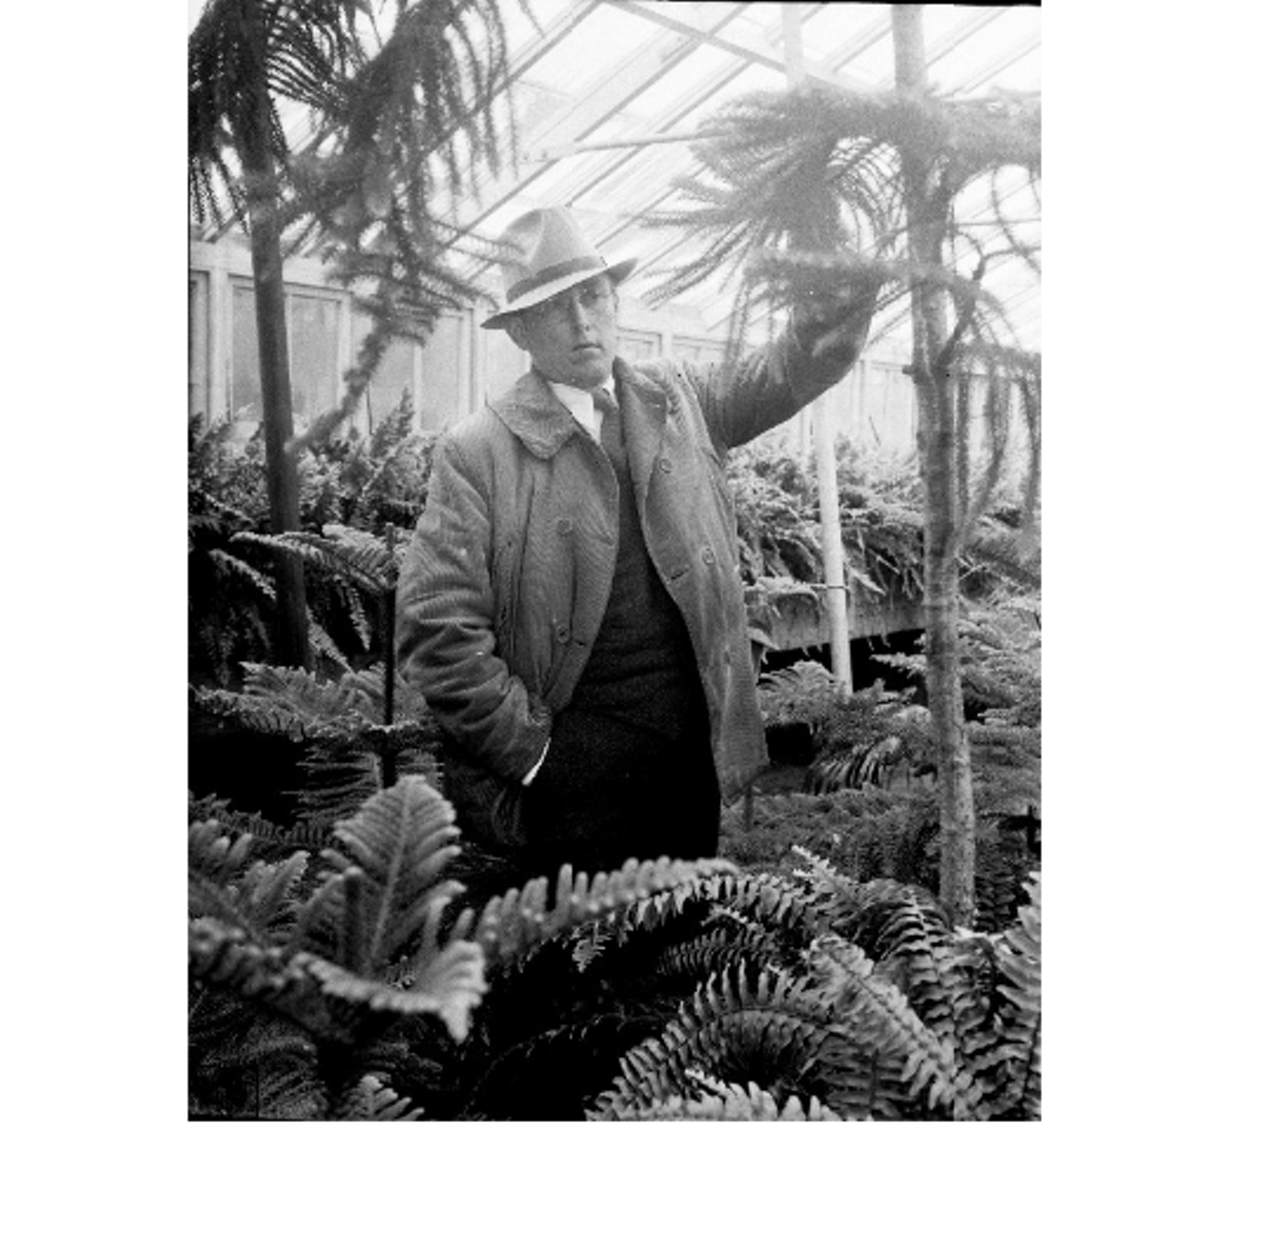 Frank A. McInniS,  Detroit Zoo Director. (Date unknown)